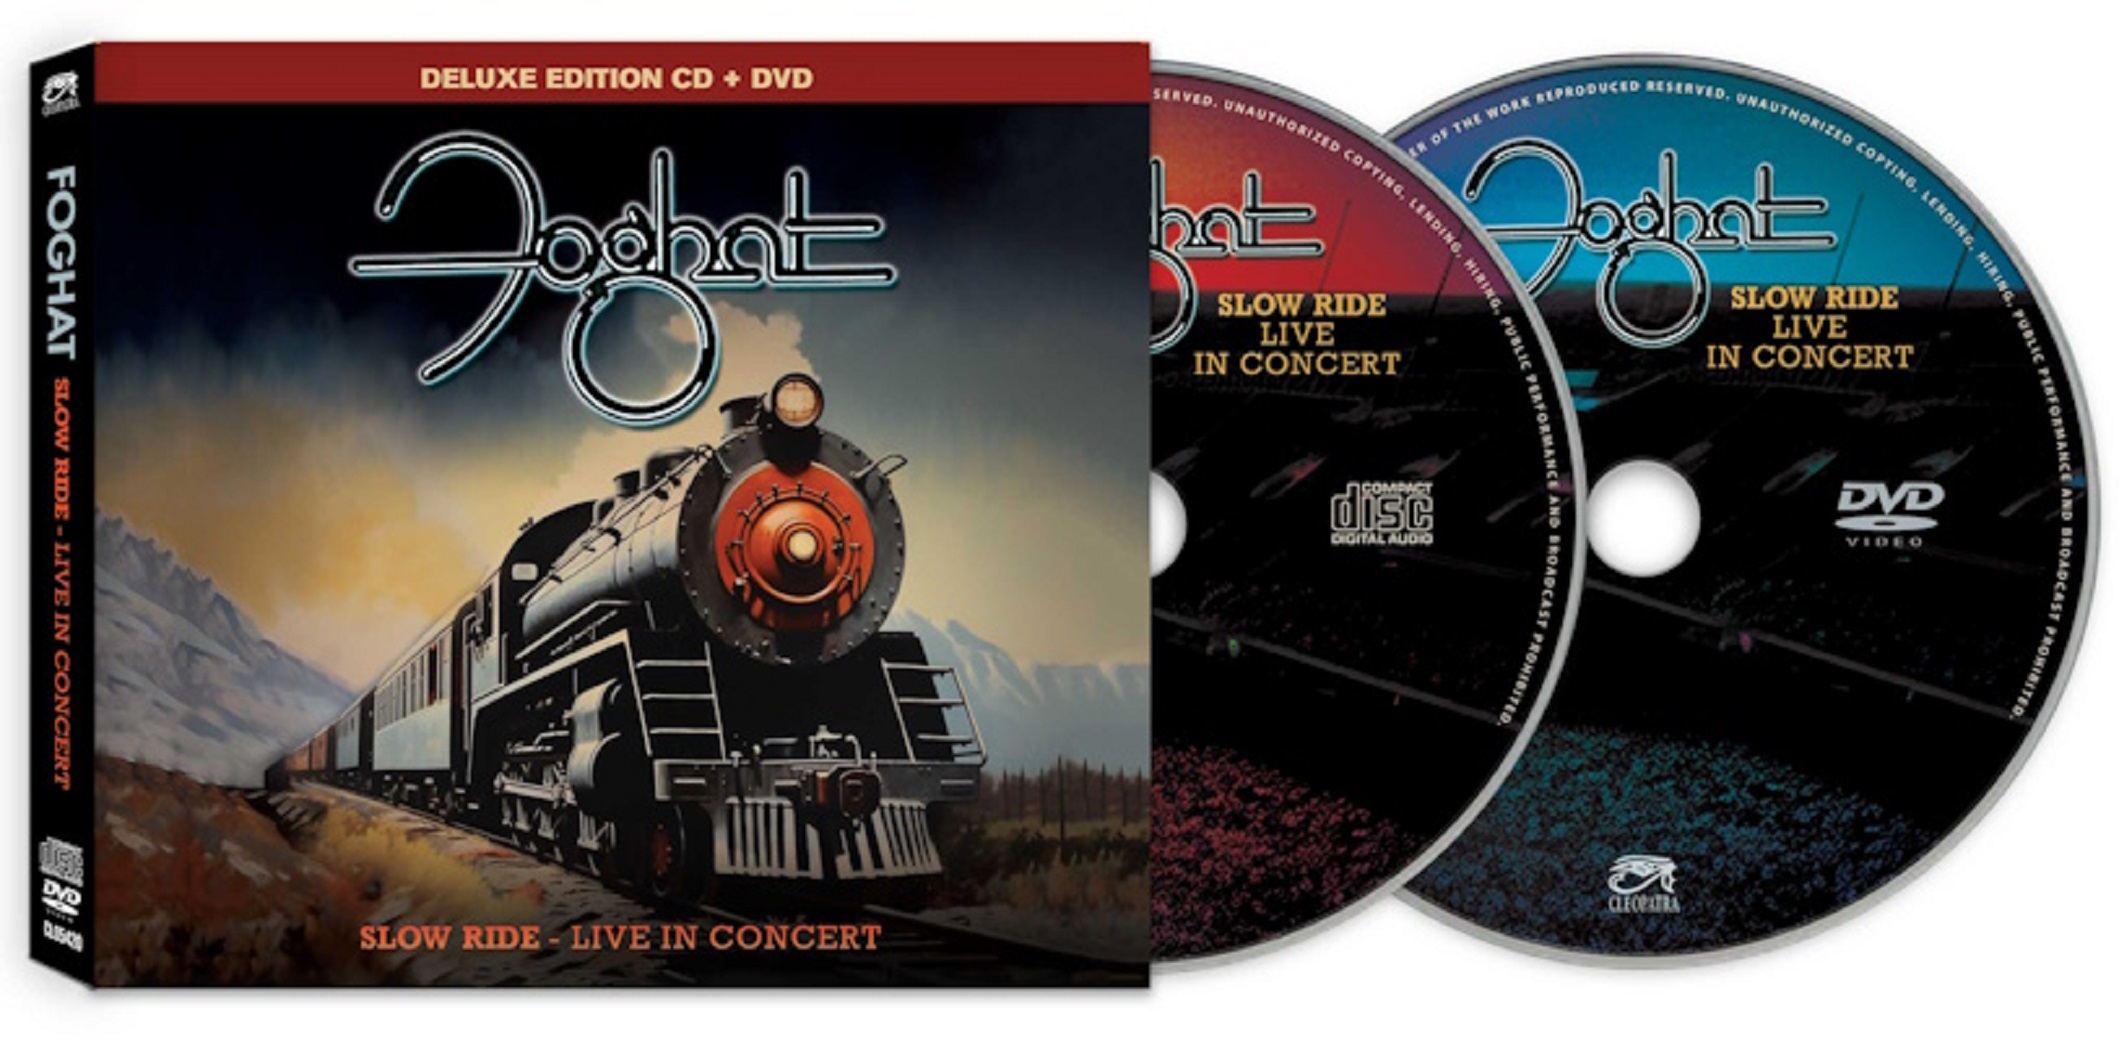 FOGHAT’s Iconic 1999 Live Performance Immortalized In CD/DVD Set SLOW RIDE - LIVE IN CONCERT!